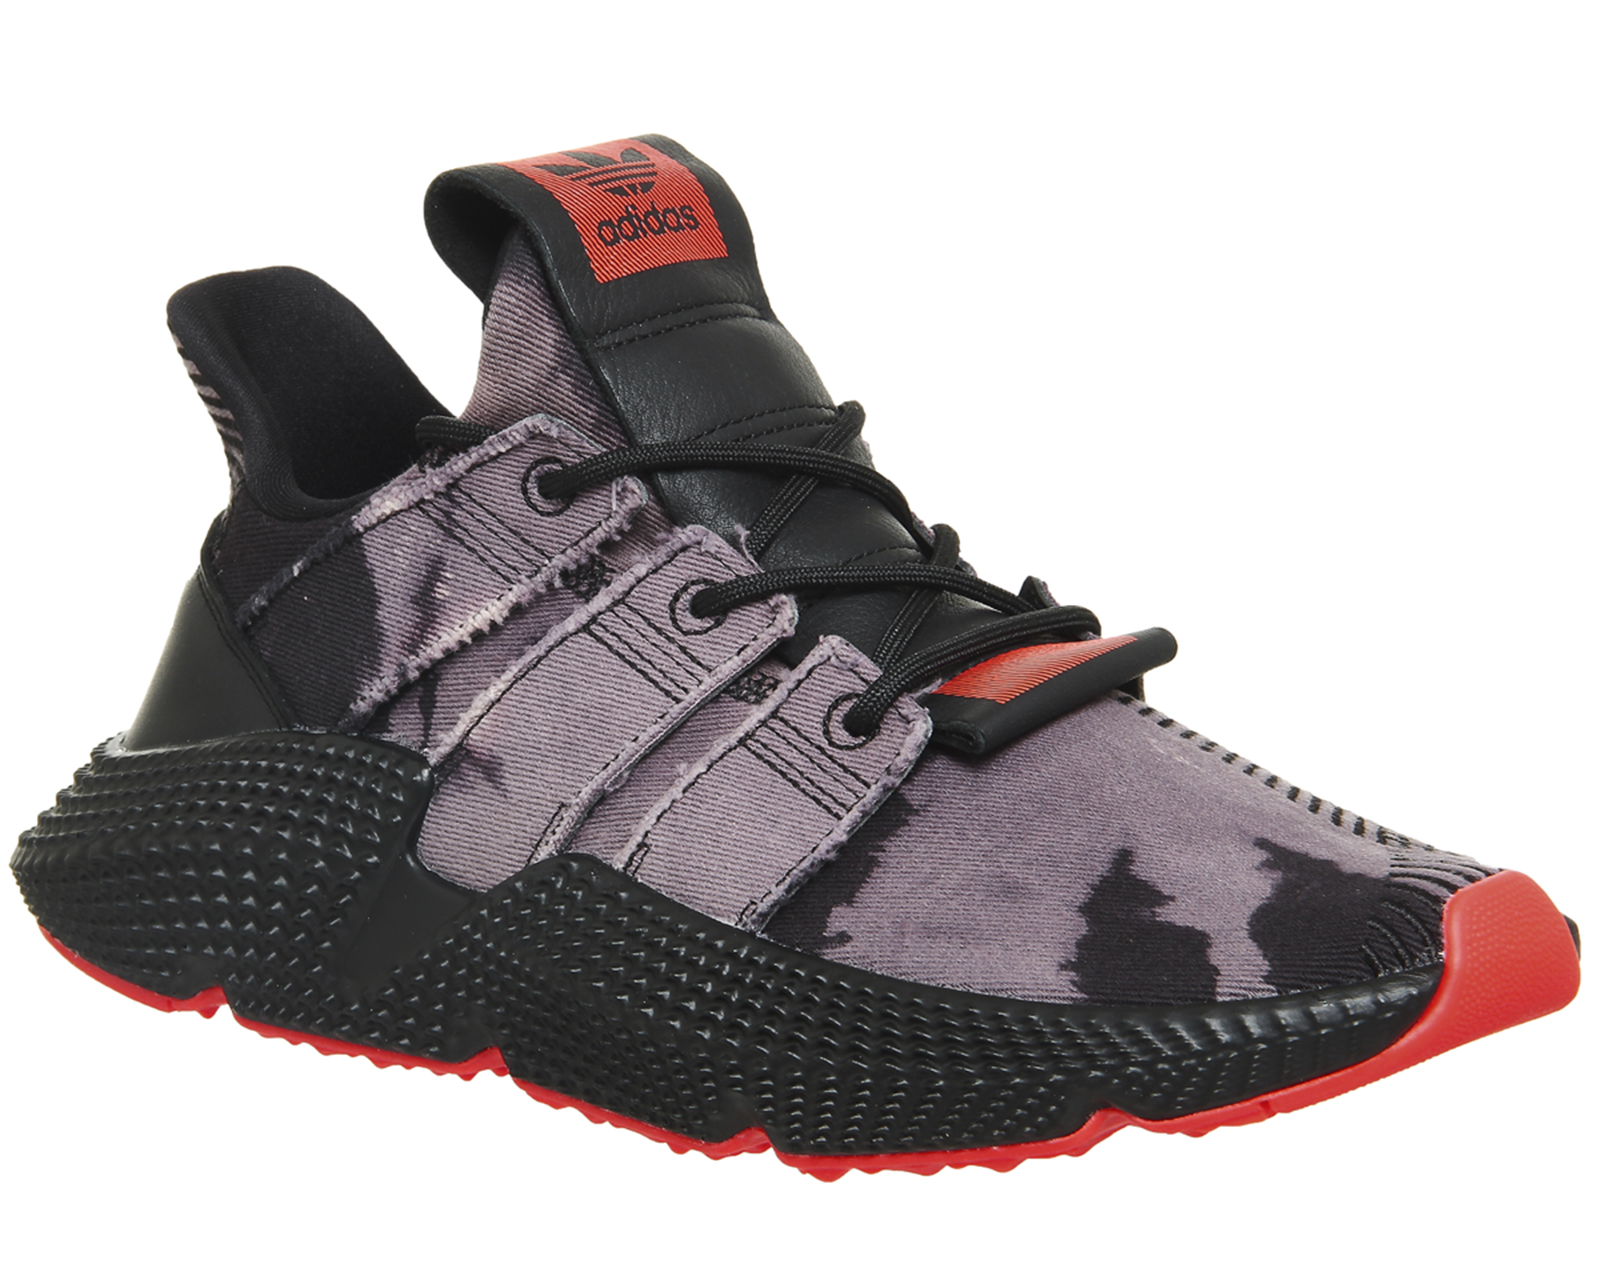 adidas Prophere Trainers Bleach Core Black Solar Red - His trainers